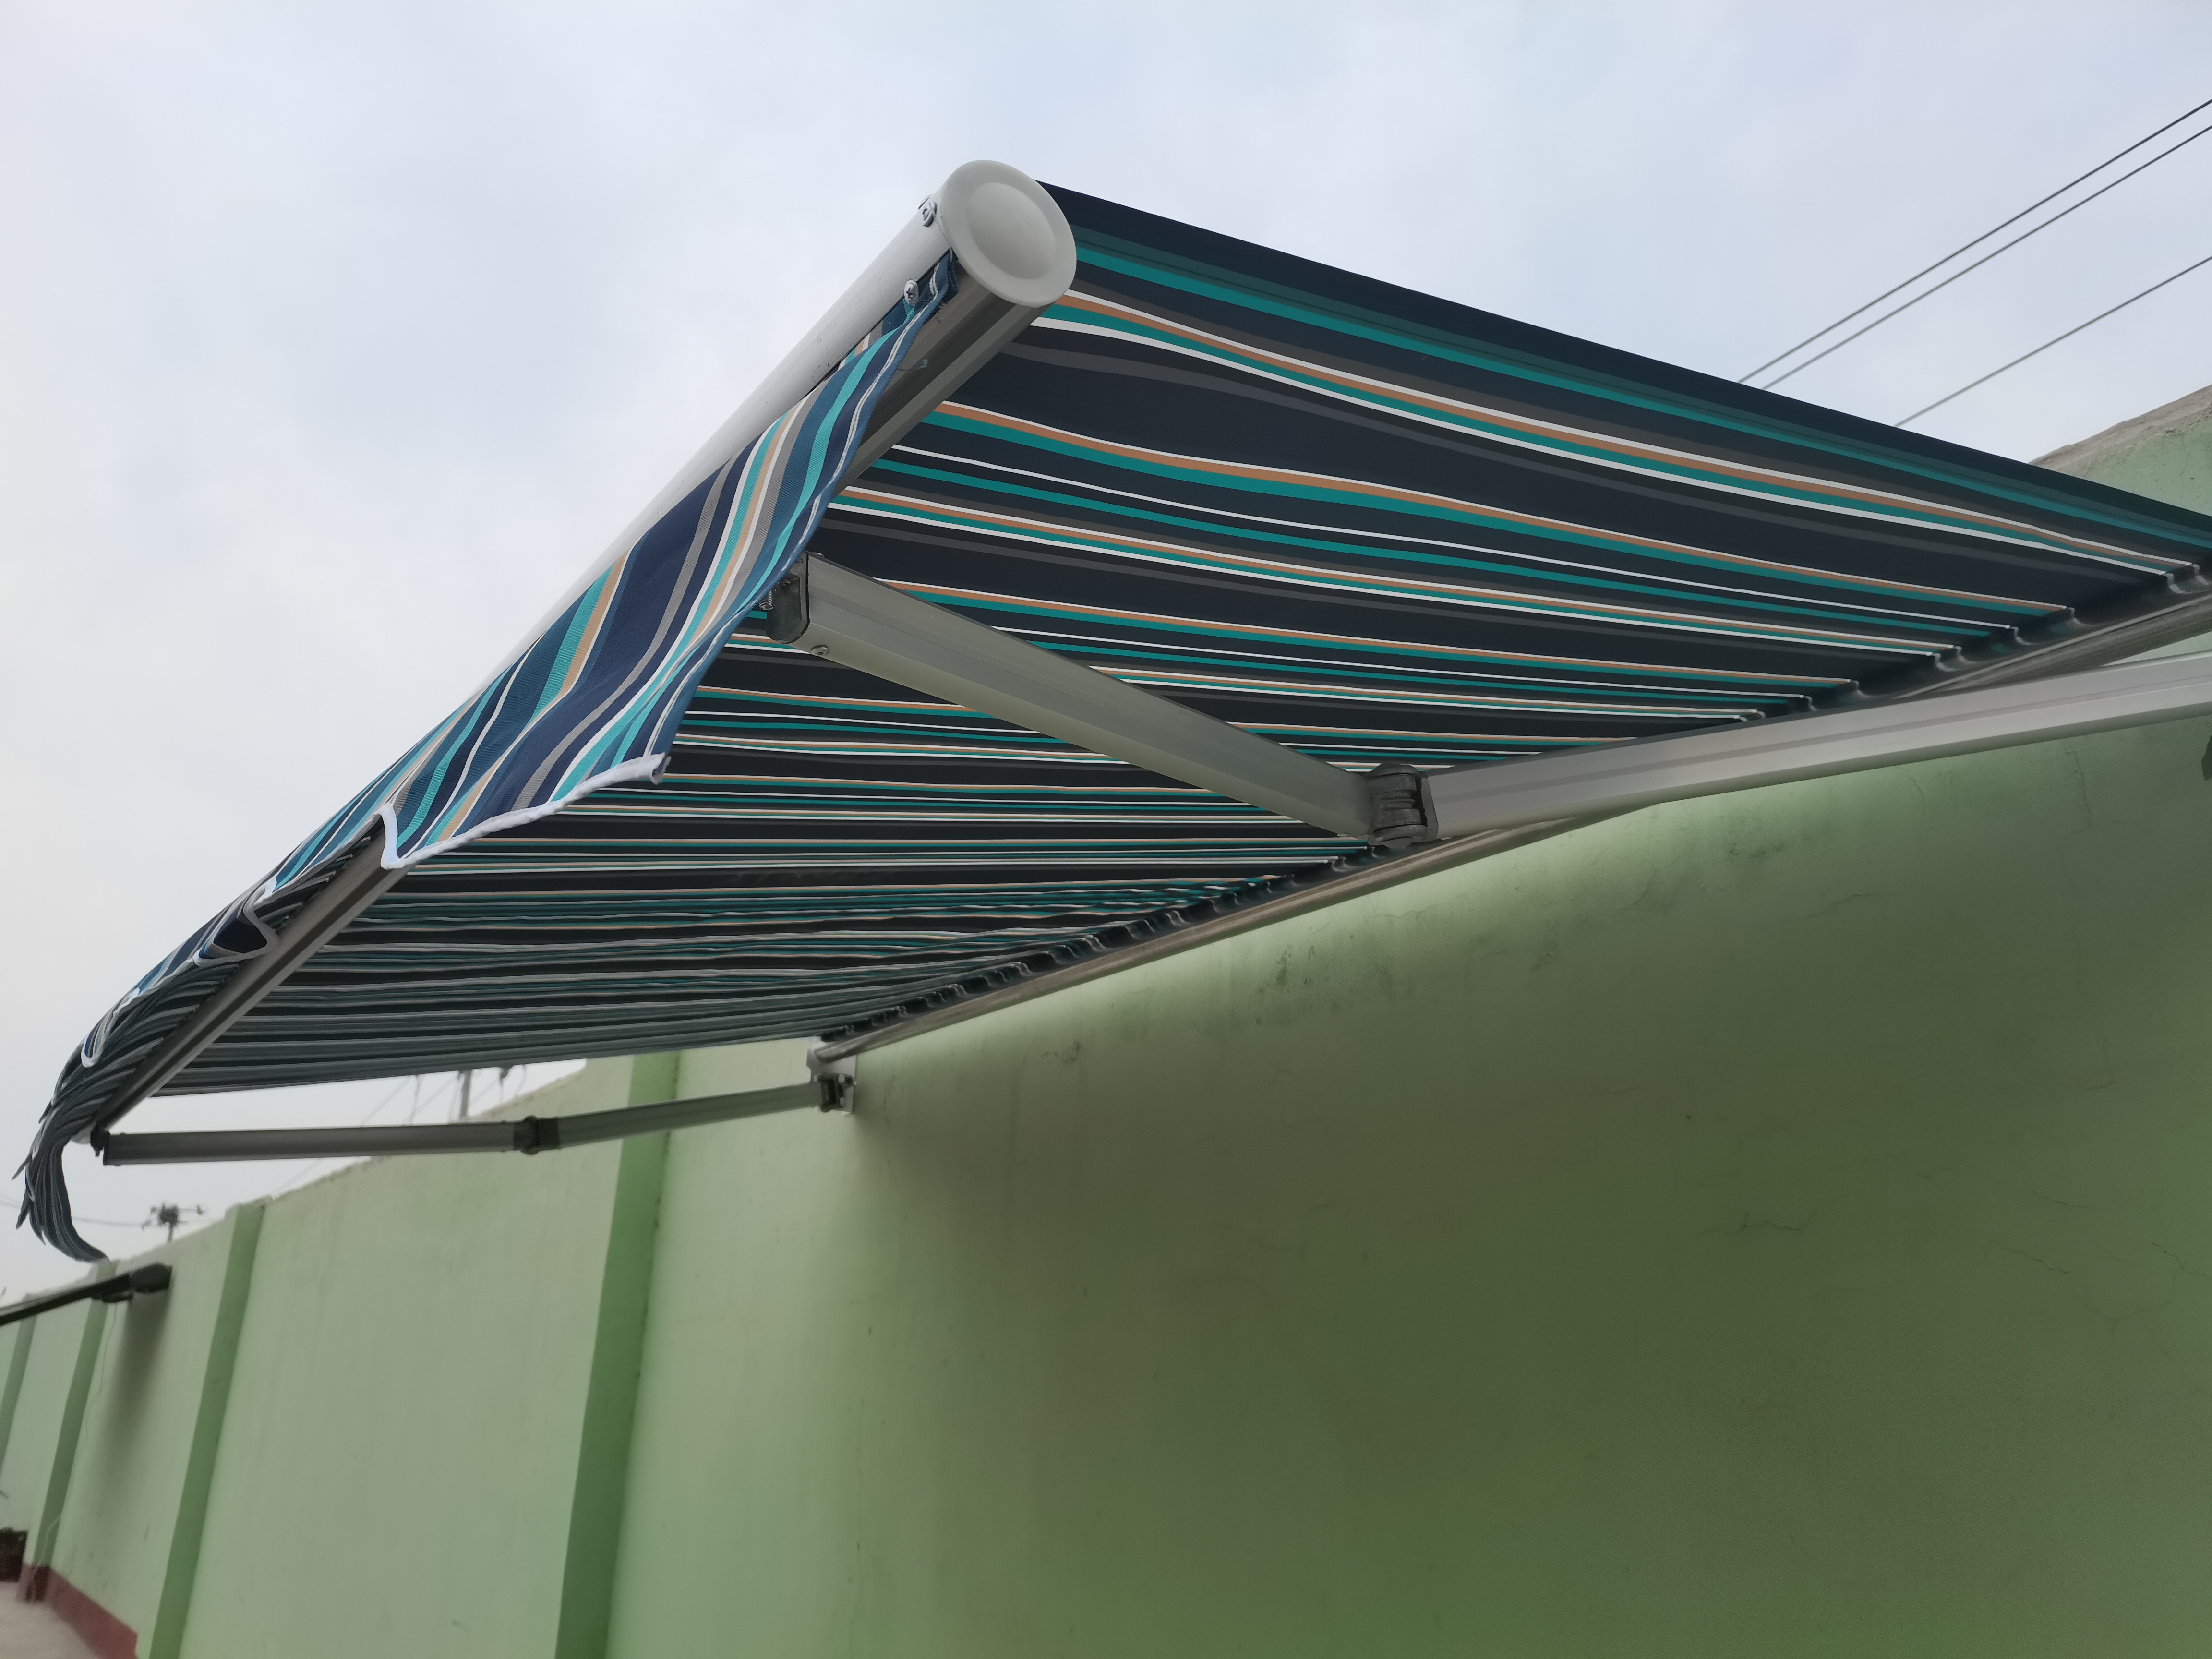 Manual Retractable Foldable Awning